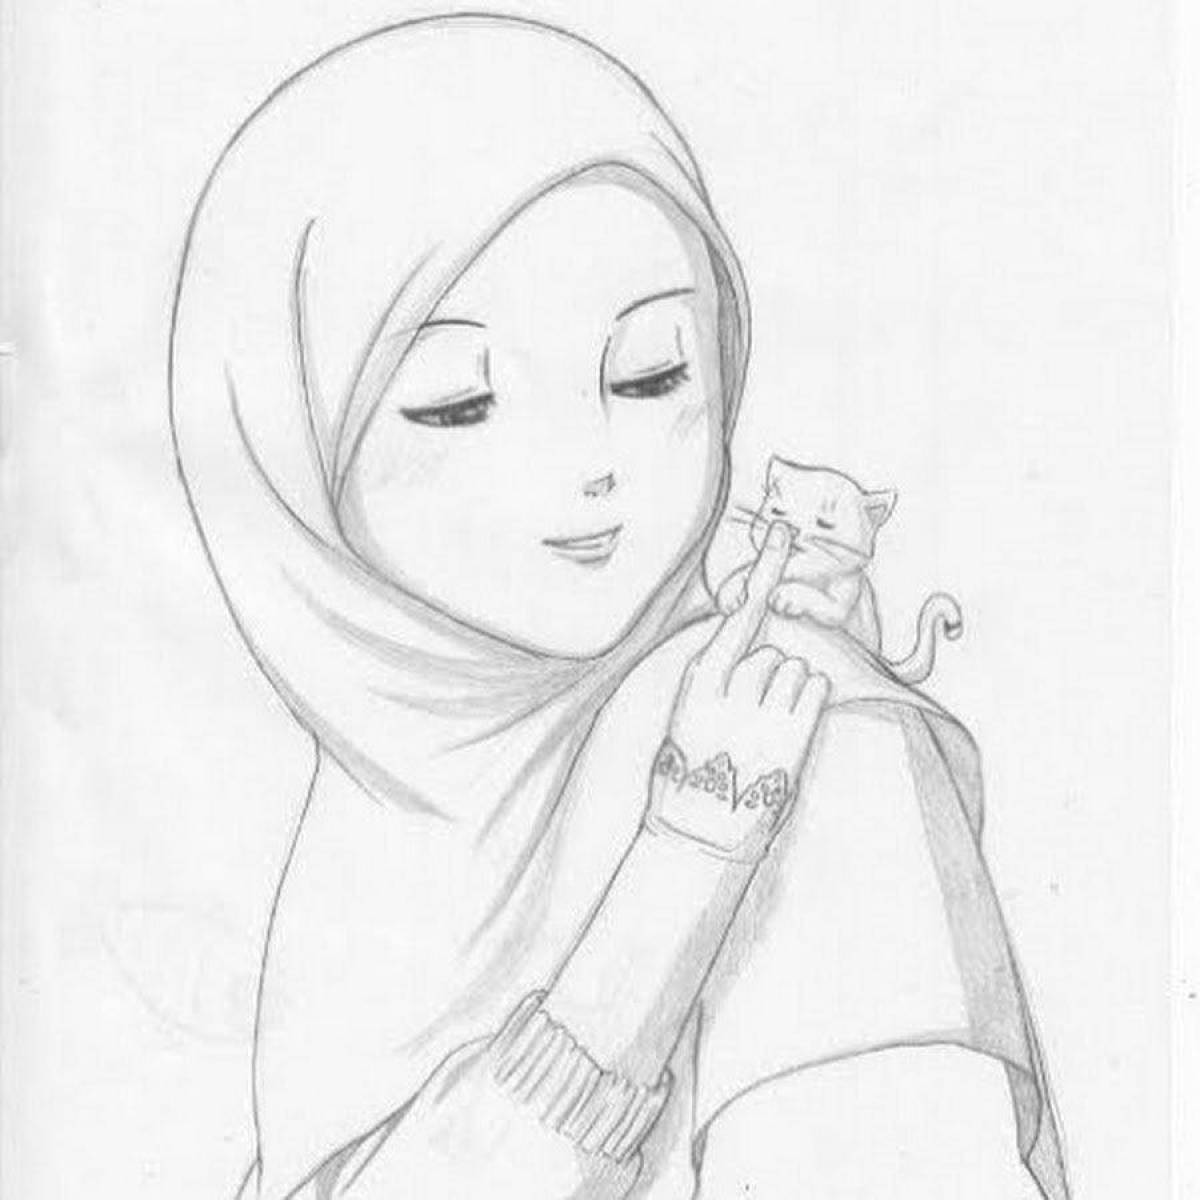 Coloring pages of Muslim girls